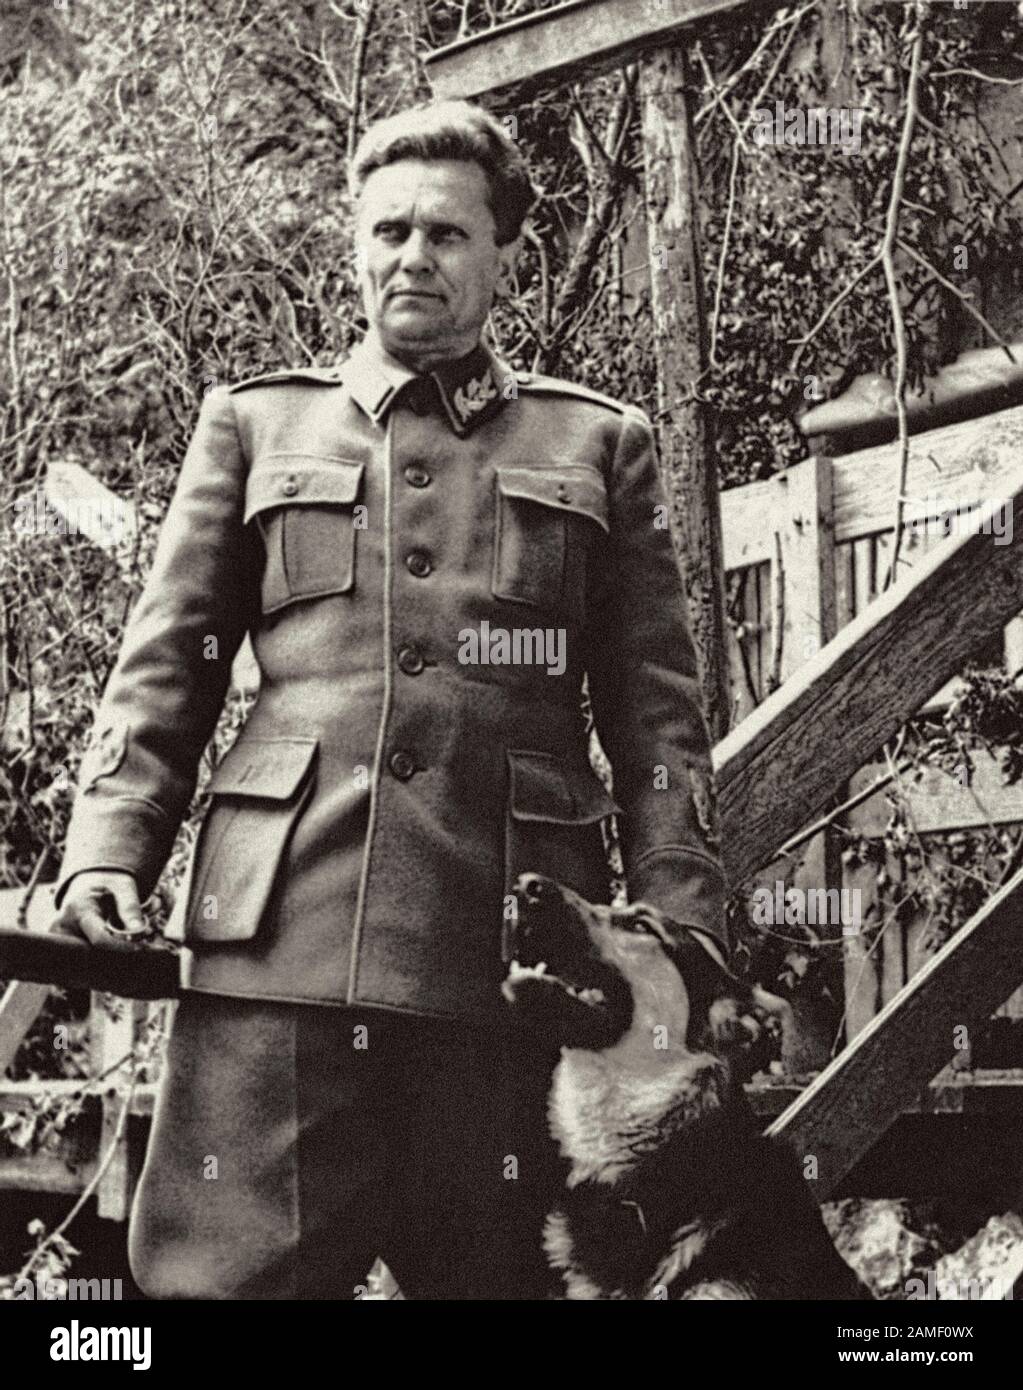 Marshal Josip Broz Tito, the leader of the united Yugoslav partisan armed forces against the Nazi invaders and their allies, poses with his dog. Stock Photo